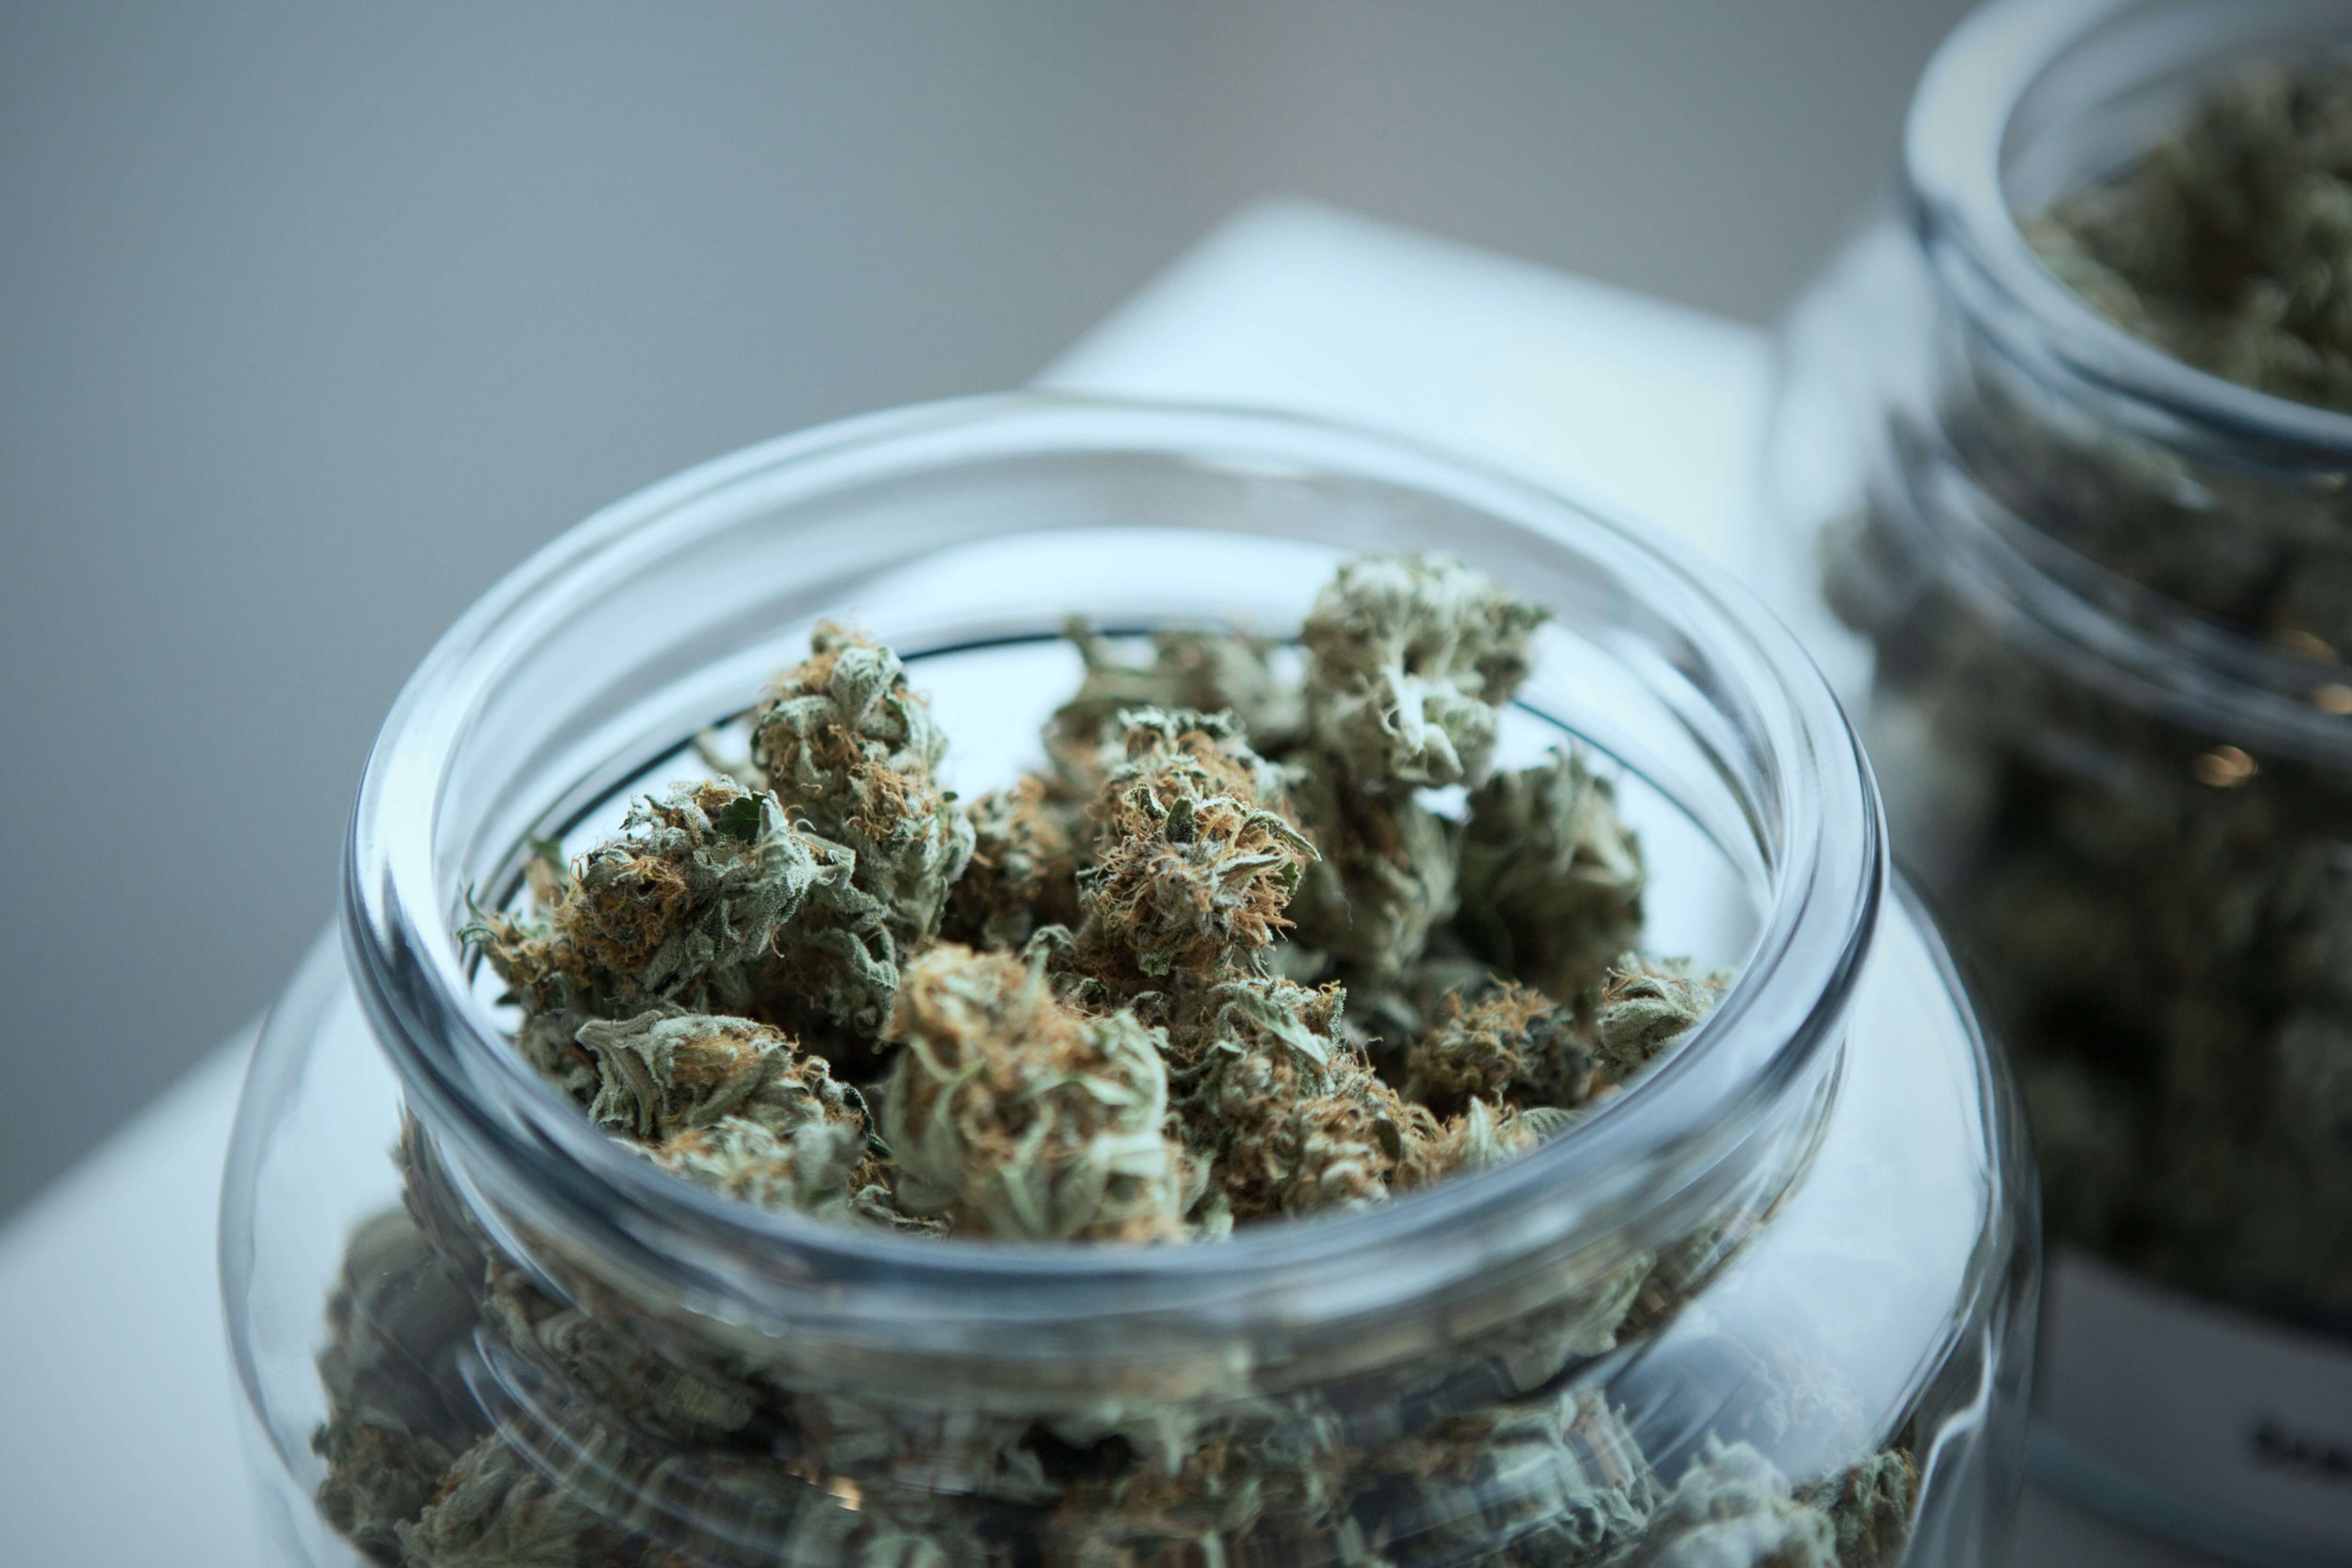 Which New York Towns Will Opt-In (or Out) of Marijuana Dispensaries?